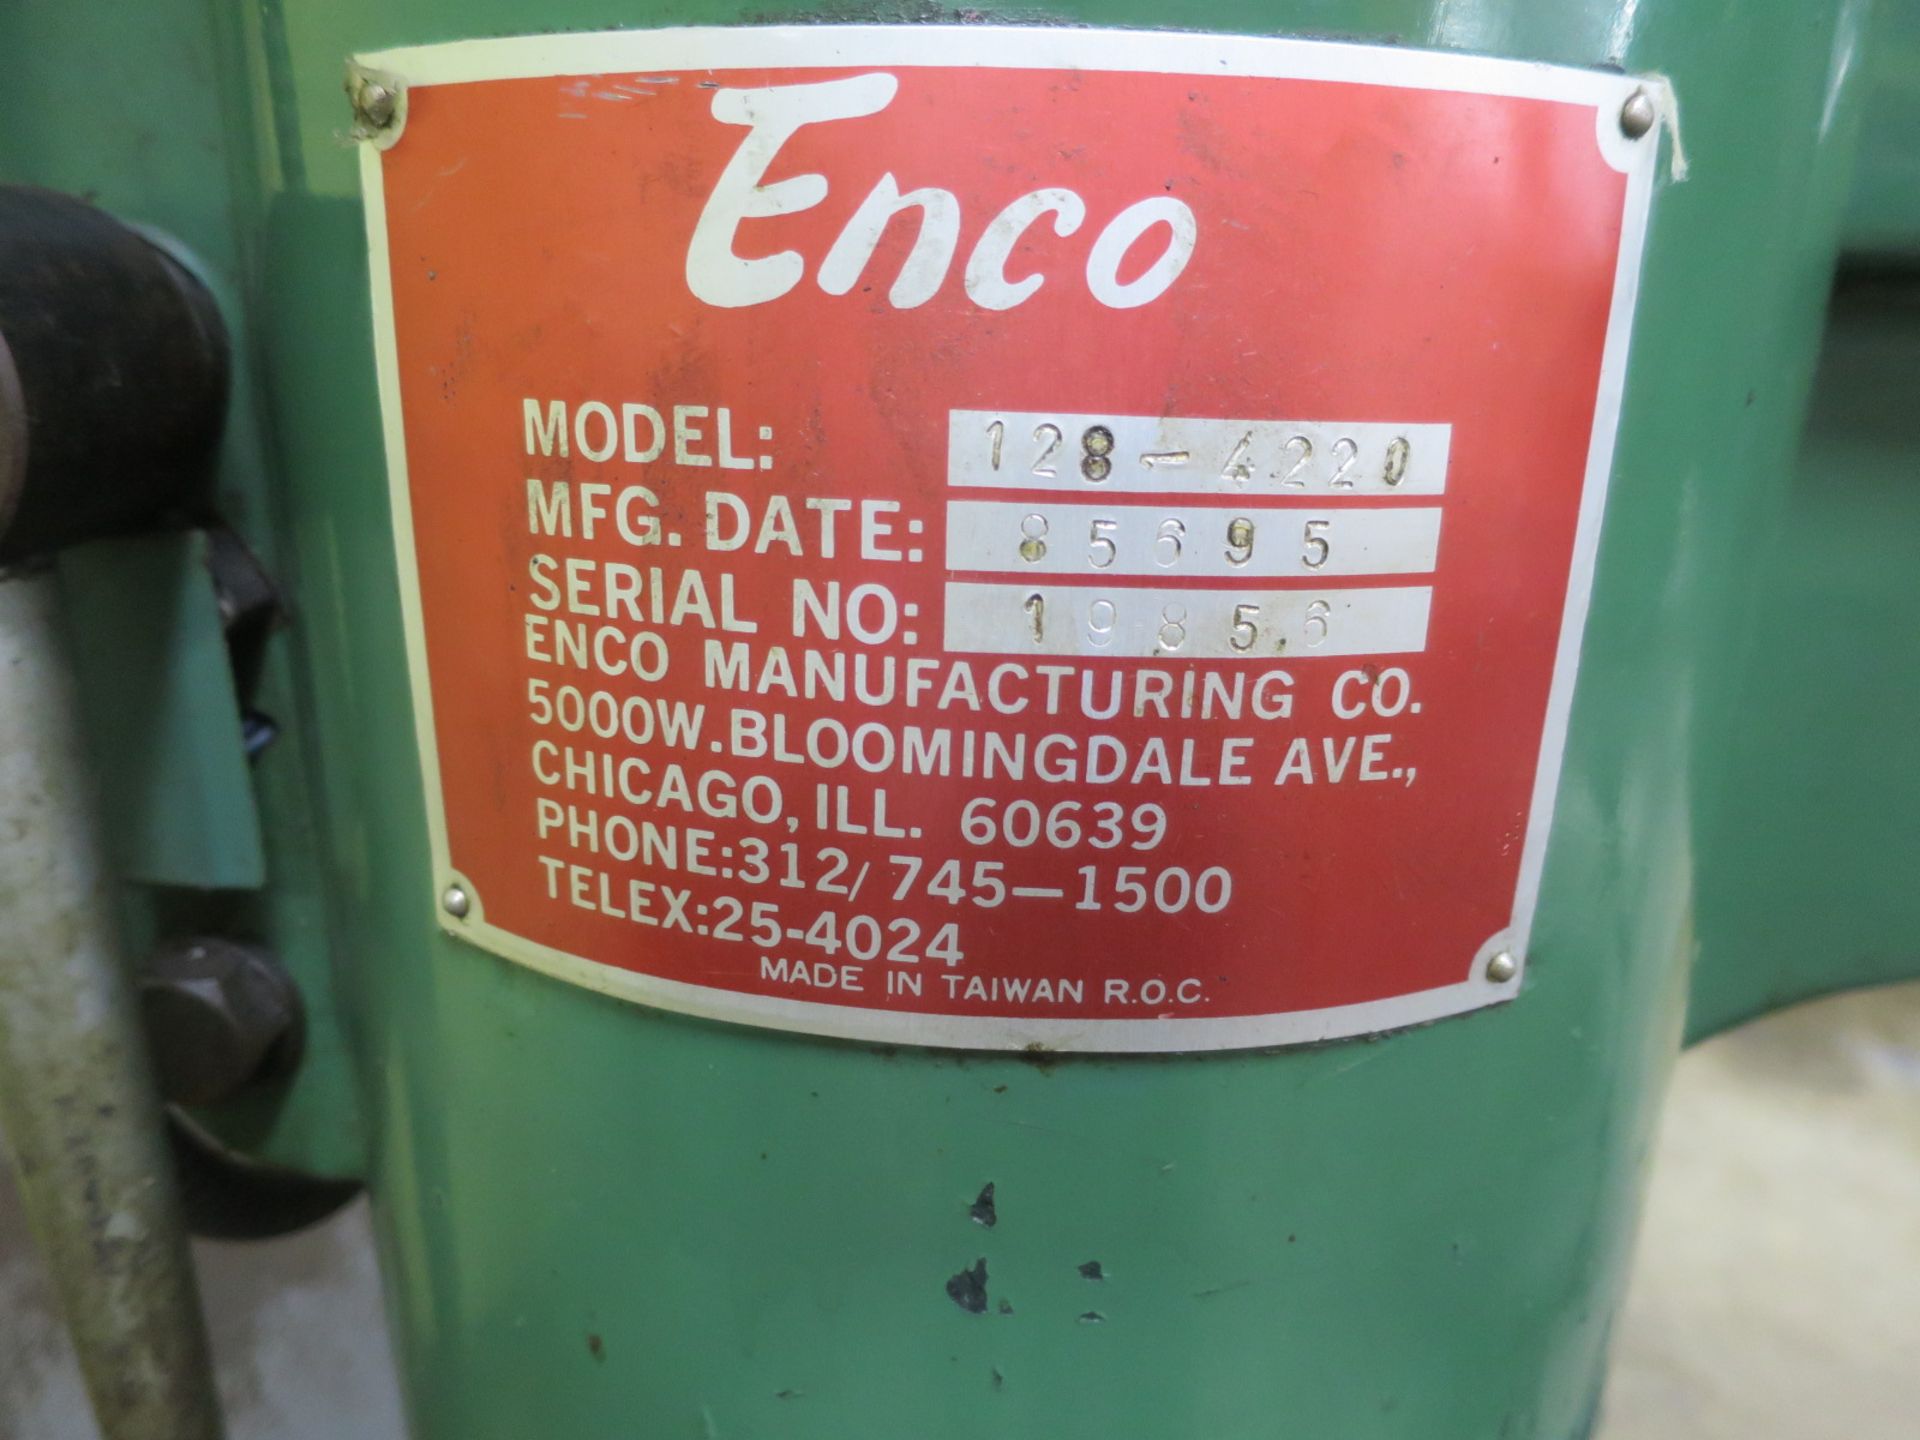 Enco Radial Arm Drill 128-4220, Dsr-750S Control, Sn 19856 - Image 2 of 5